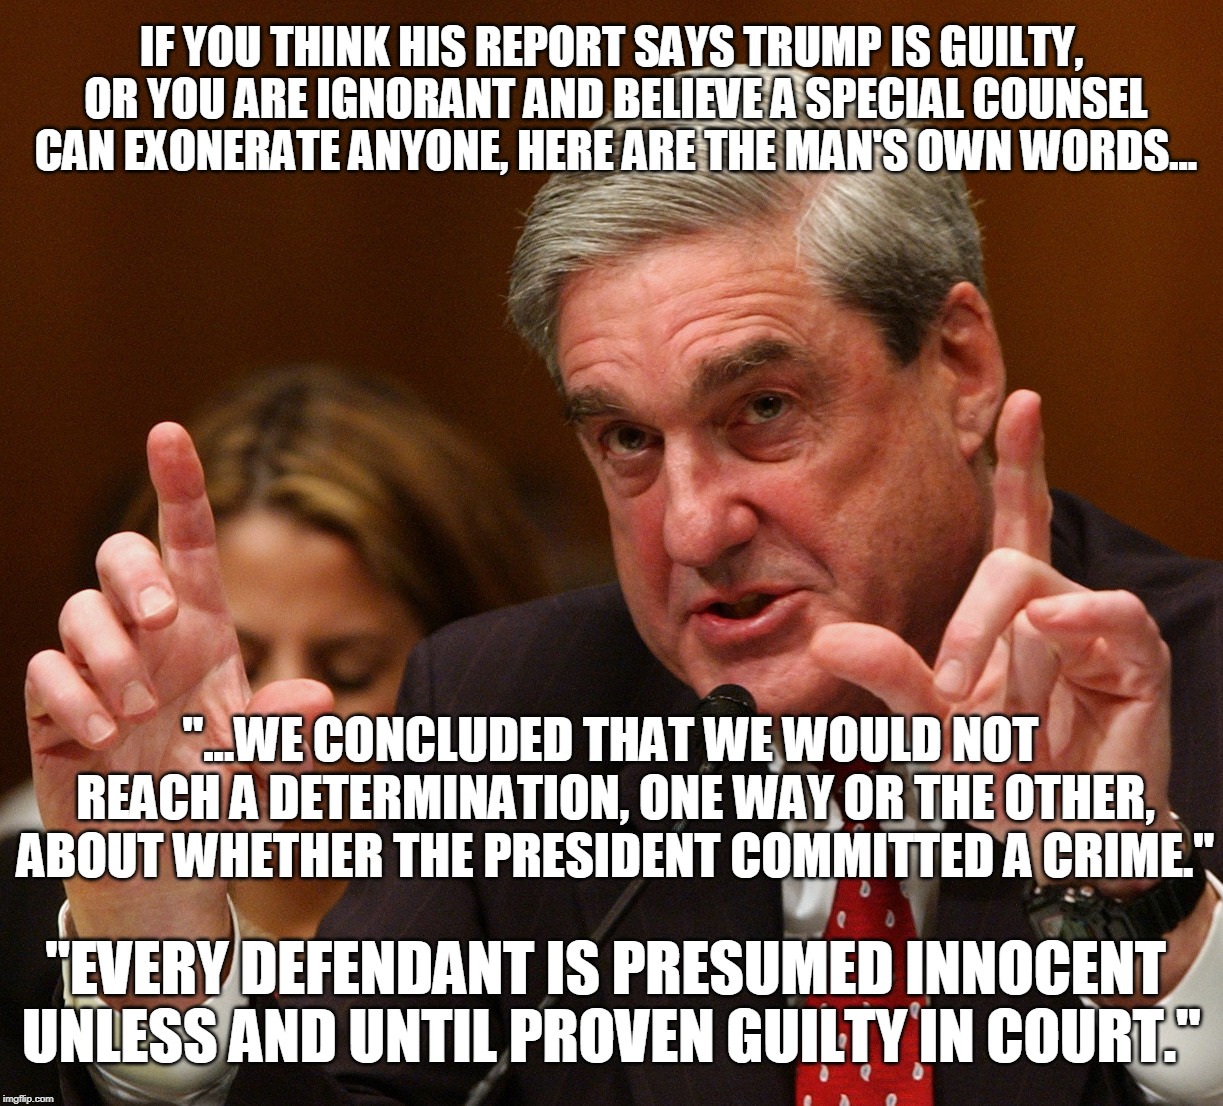 If he could prove any wrongdoing, he would have said so!!! | IF YOU THINK HIS REPORT SAYS TRUMP IS GUILTY, OR YOU ARE IGNORANT AND BELIEVE A SPECIAL COUNSEL CAN EXONERATE ANYONE, HERE ARE THE MAN'S OWN WORDS... "...WE CONCLUDED THAT WE WOULD NOT REACH A DETERMINATION, ONE WAY OR THE OTHER, ABOUT WHETHER THE PRESIDENT COMMITTED A CRIME."; "EVERY DEFENDANT IS PRESUMED INNOCENT UNLESS AND UNTIL PROVEN GUILTY IN COURT." | image tagged in trump,mueller,boondoggle | made w/ Imgflip meme maker